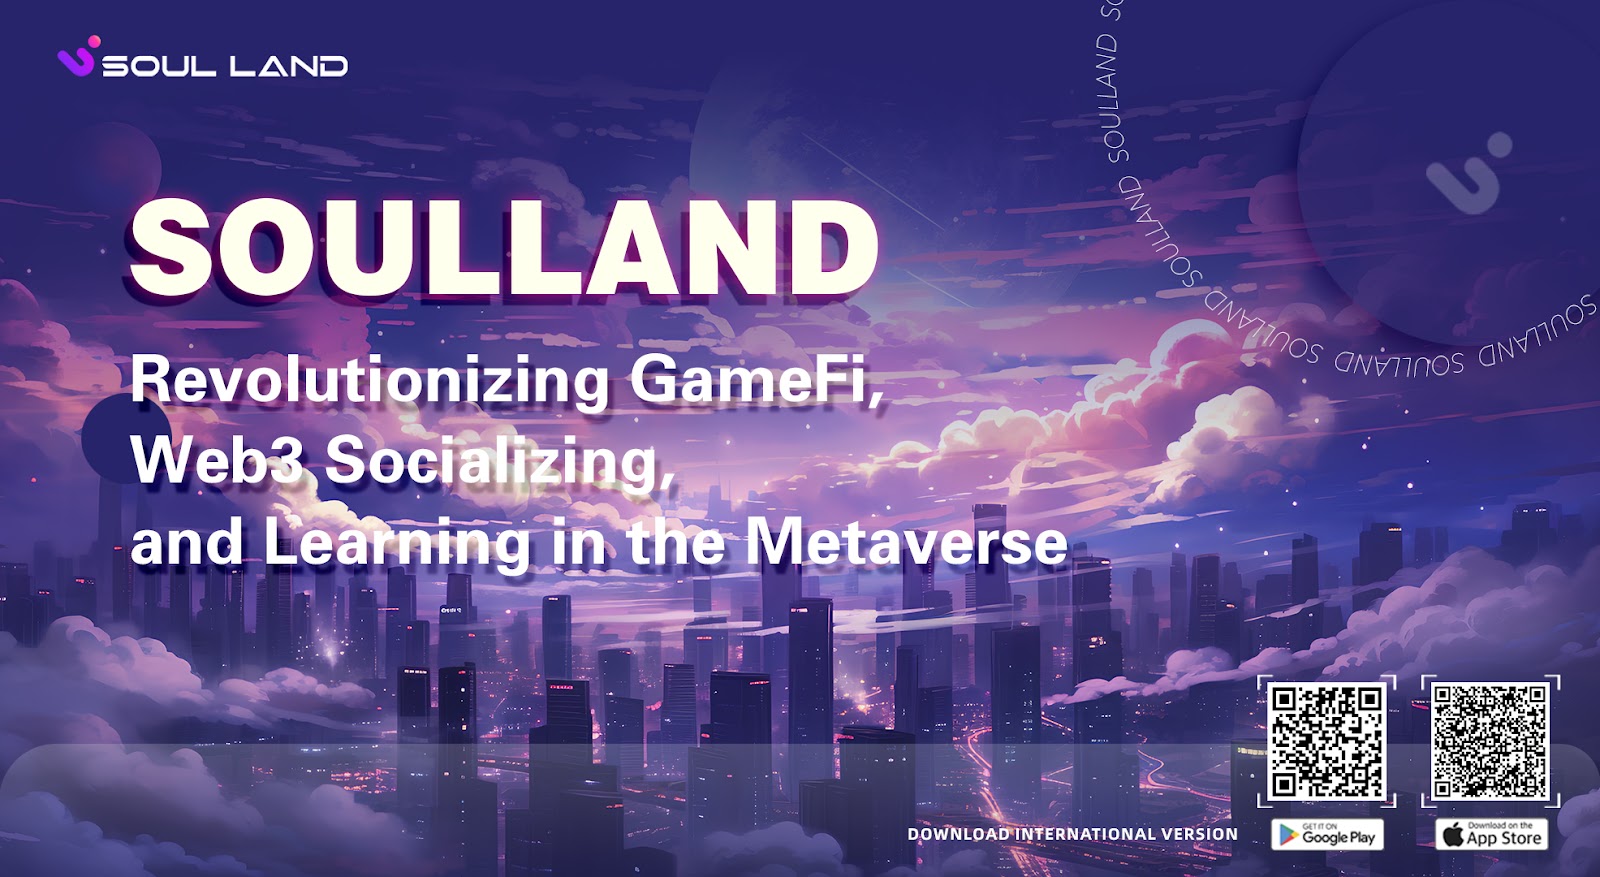 SoulLand: Revolutionizing GameFi, Web3 Socializing, and Learning in the Metaverse